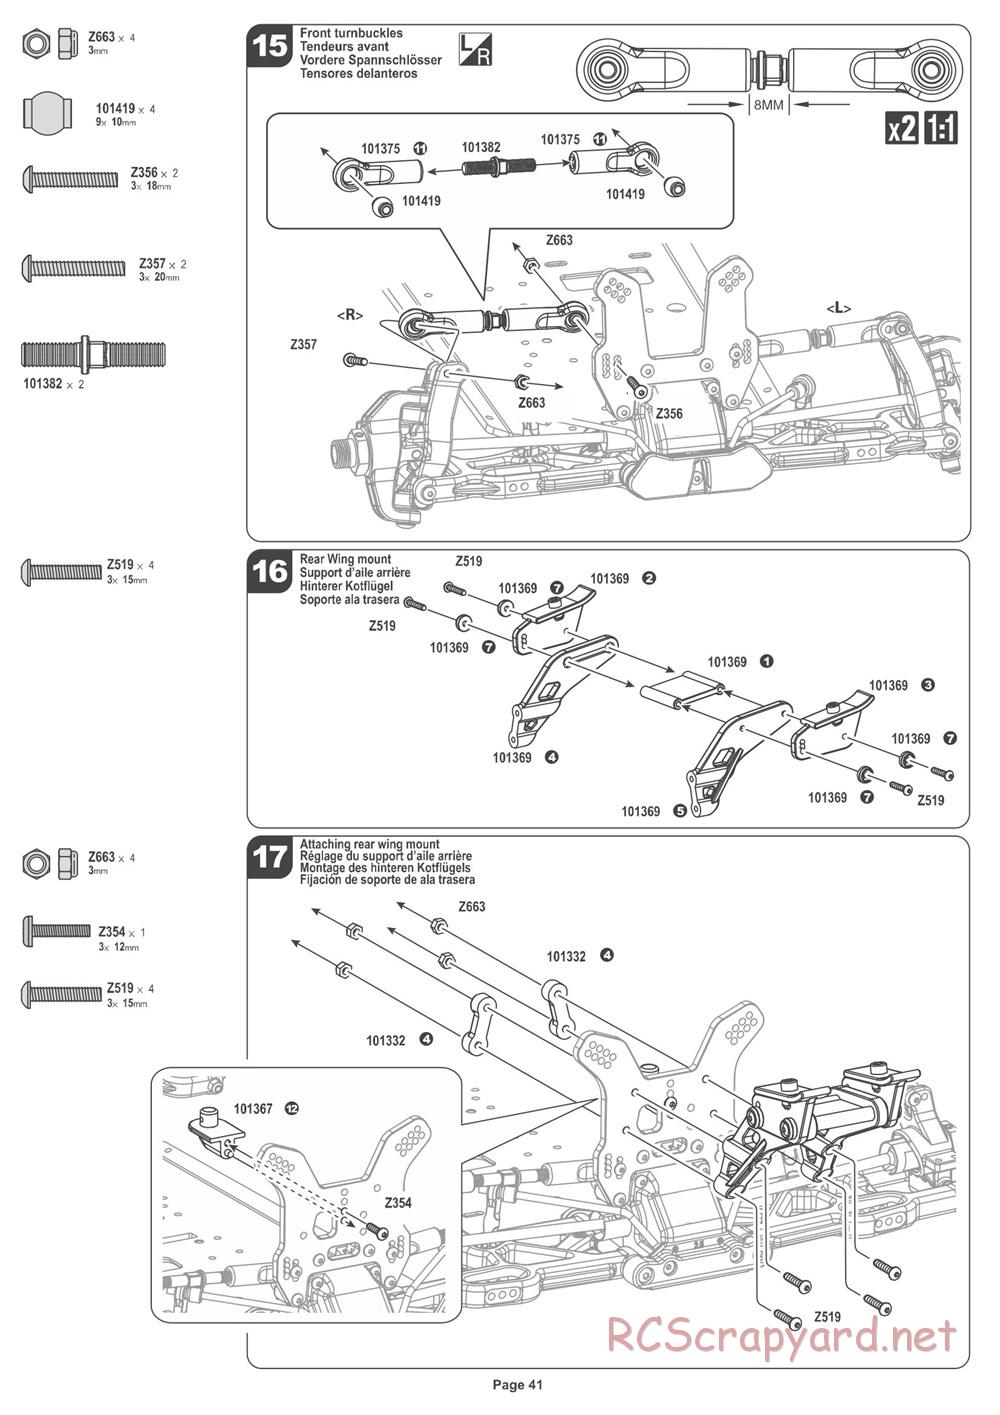 HPI - Pulse 4.6 Buggy - Manual - Page 41